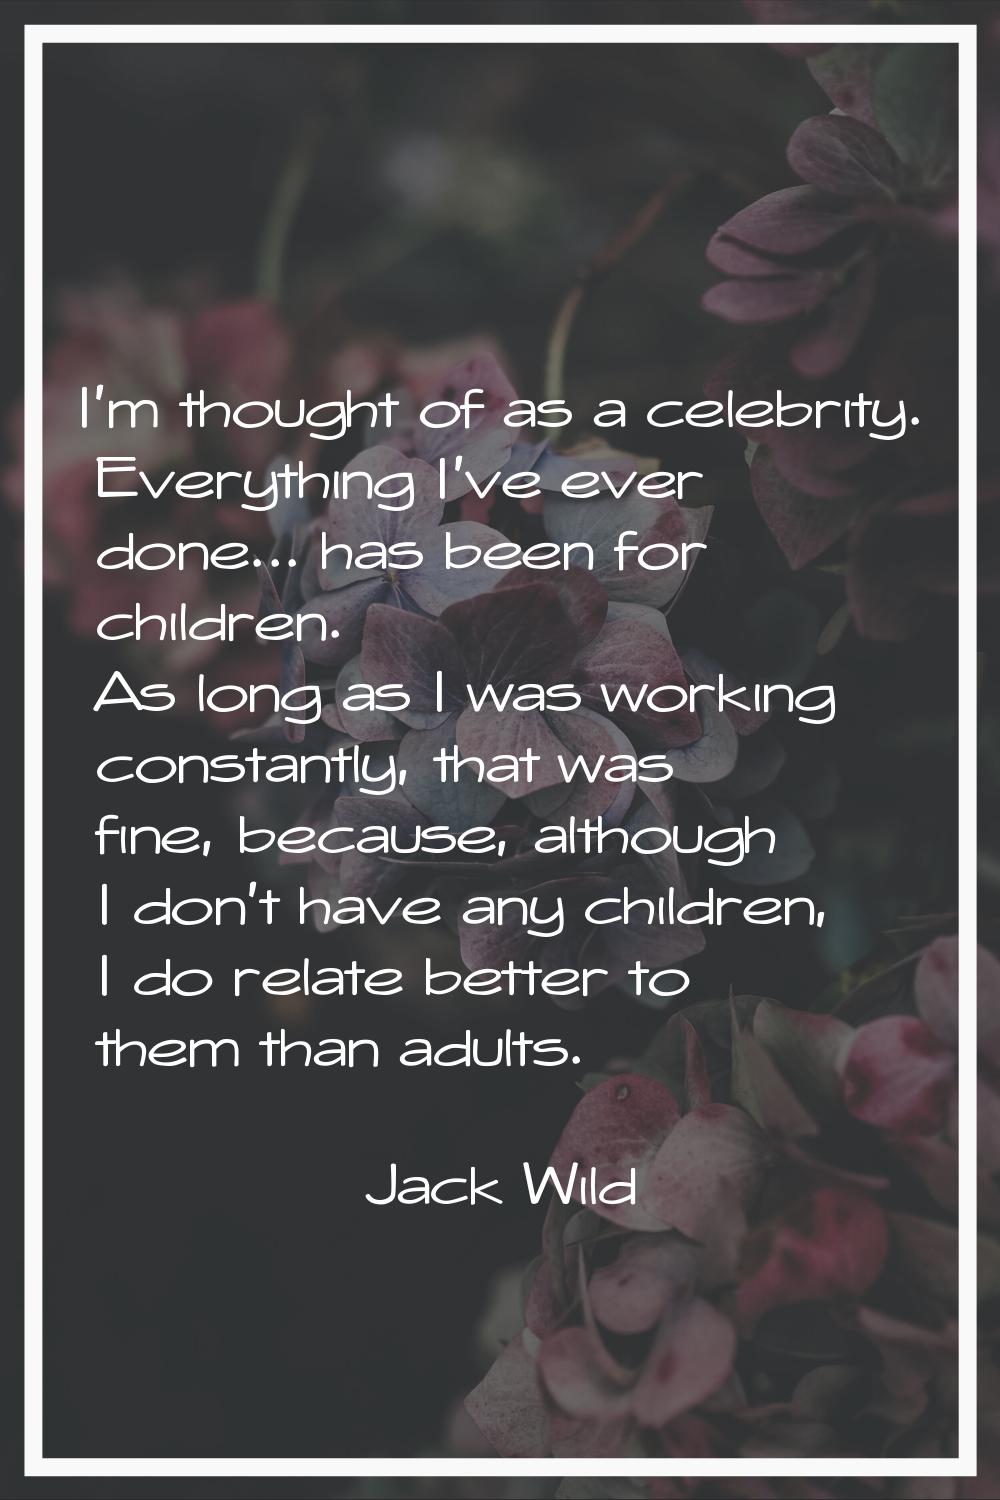 I'm thought of as a celebrity. Everything I've ever done... has been for children. As long as I was